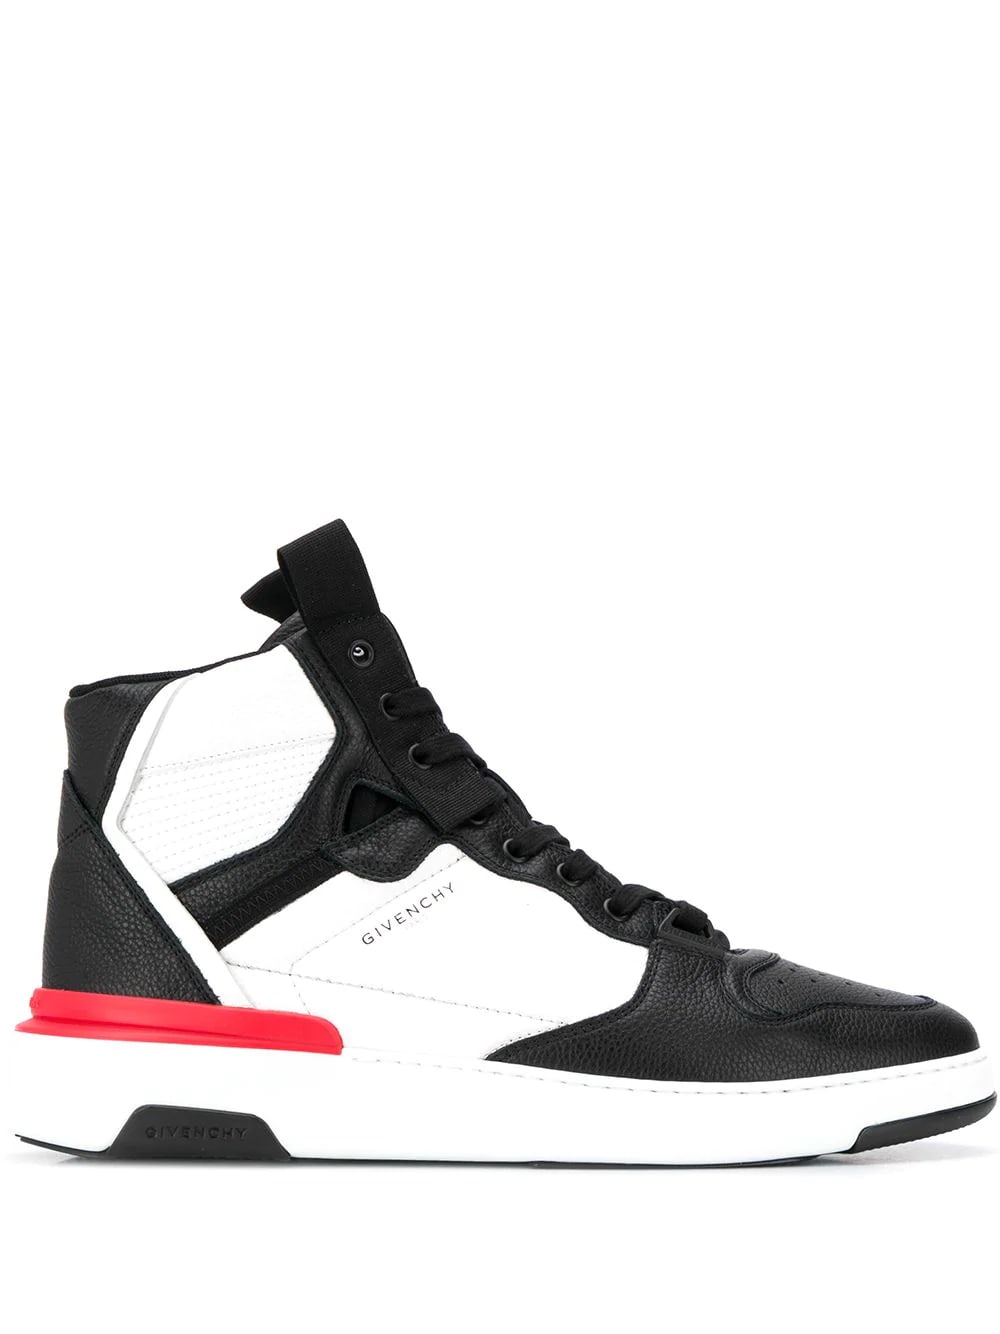 Givenchy Man Wing High Sneakers In Bicolor Leather